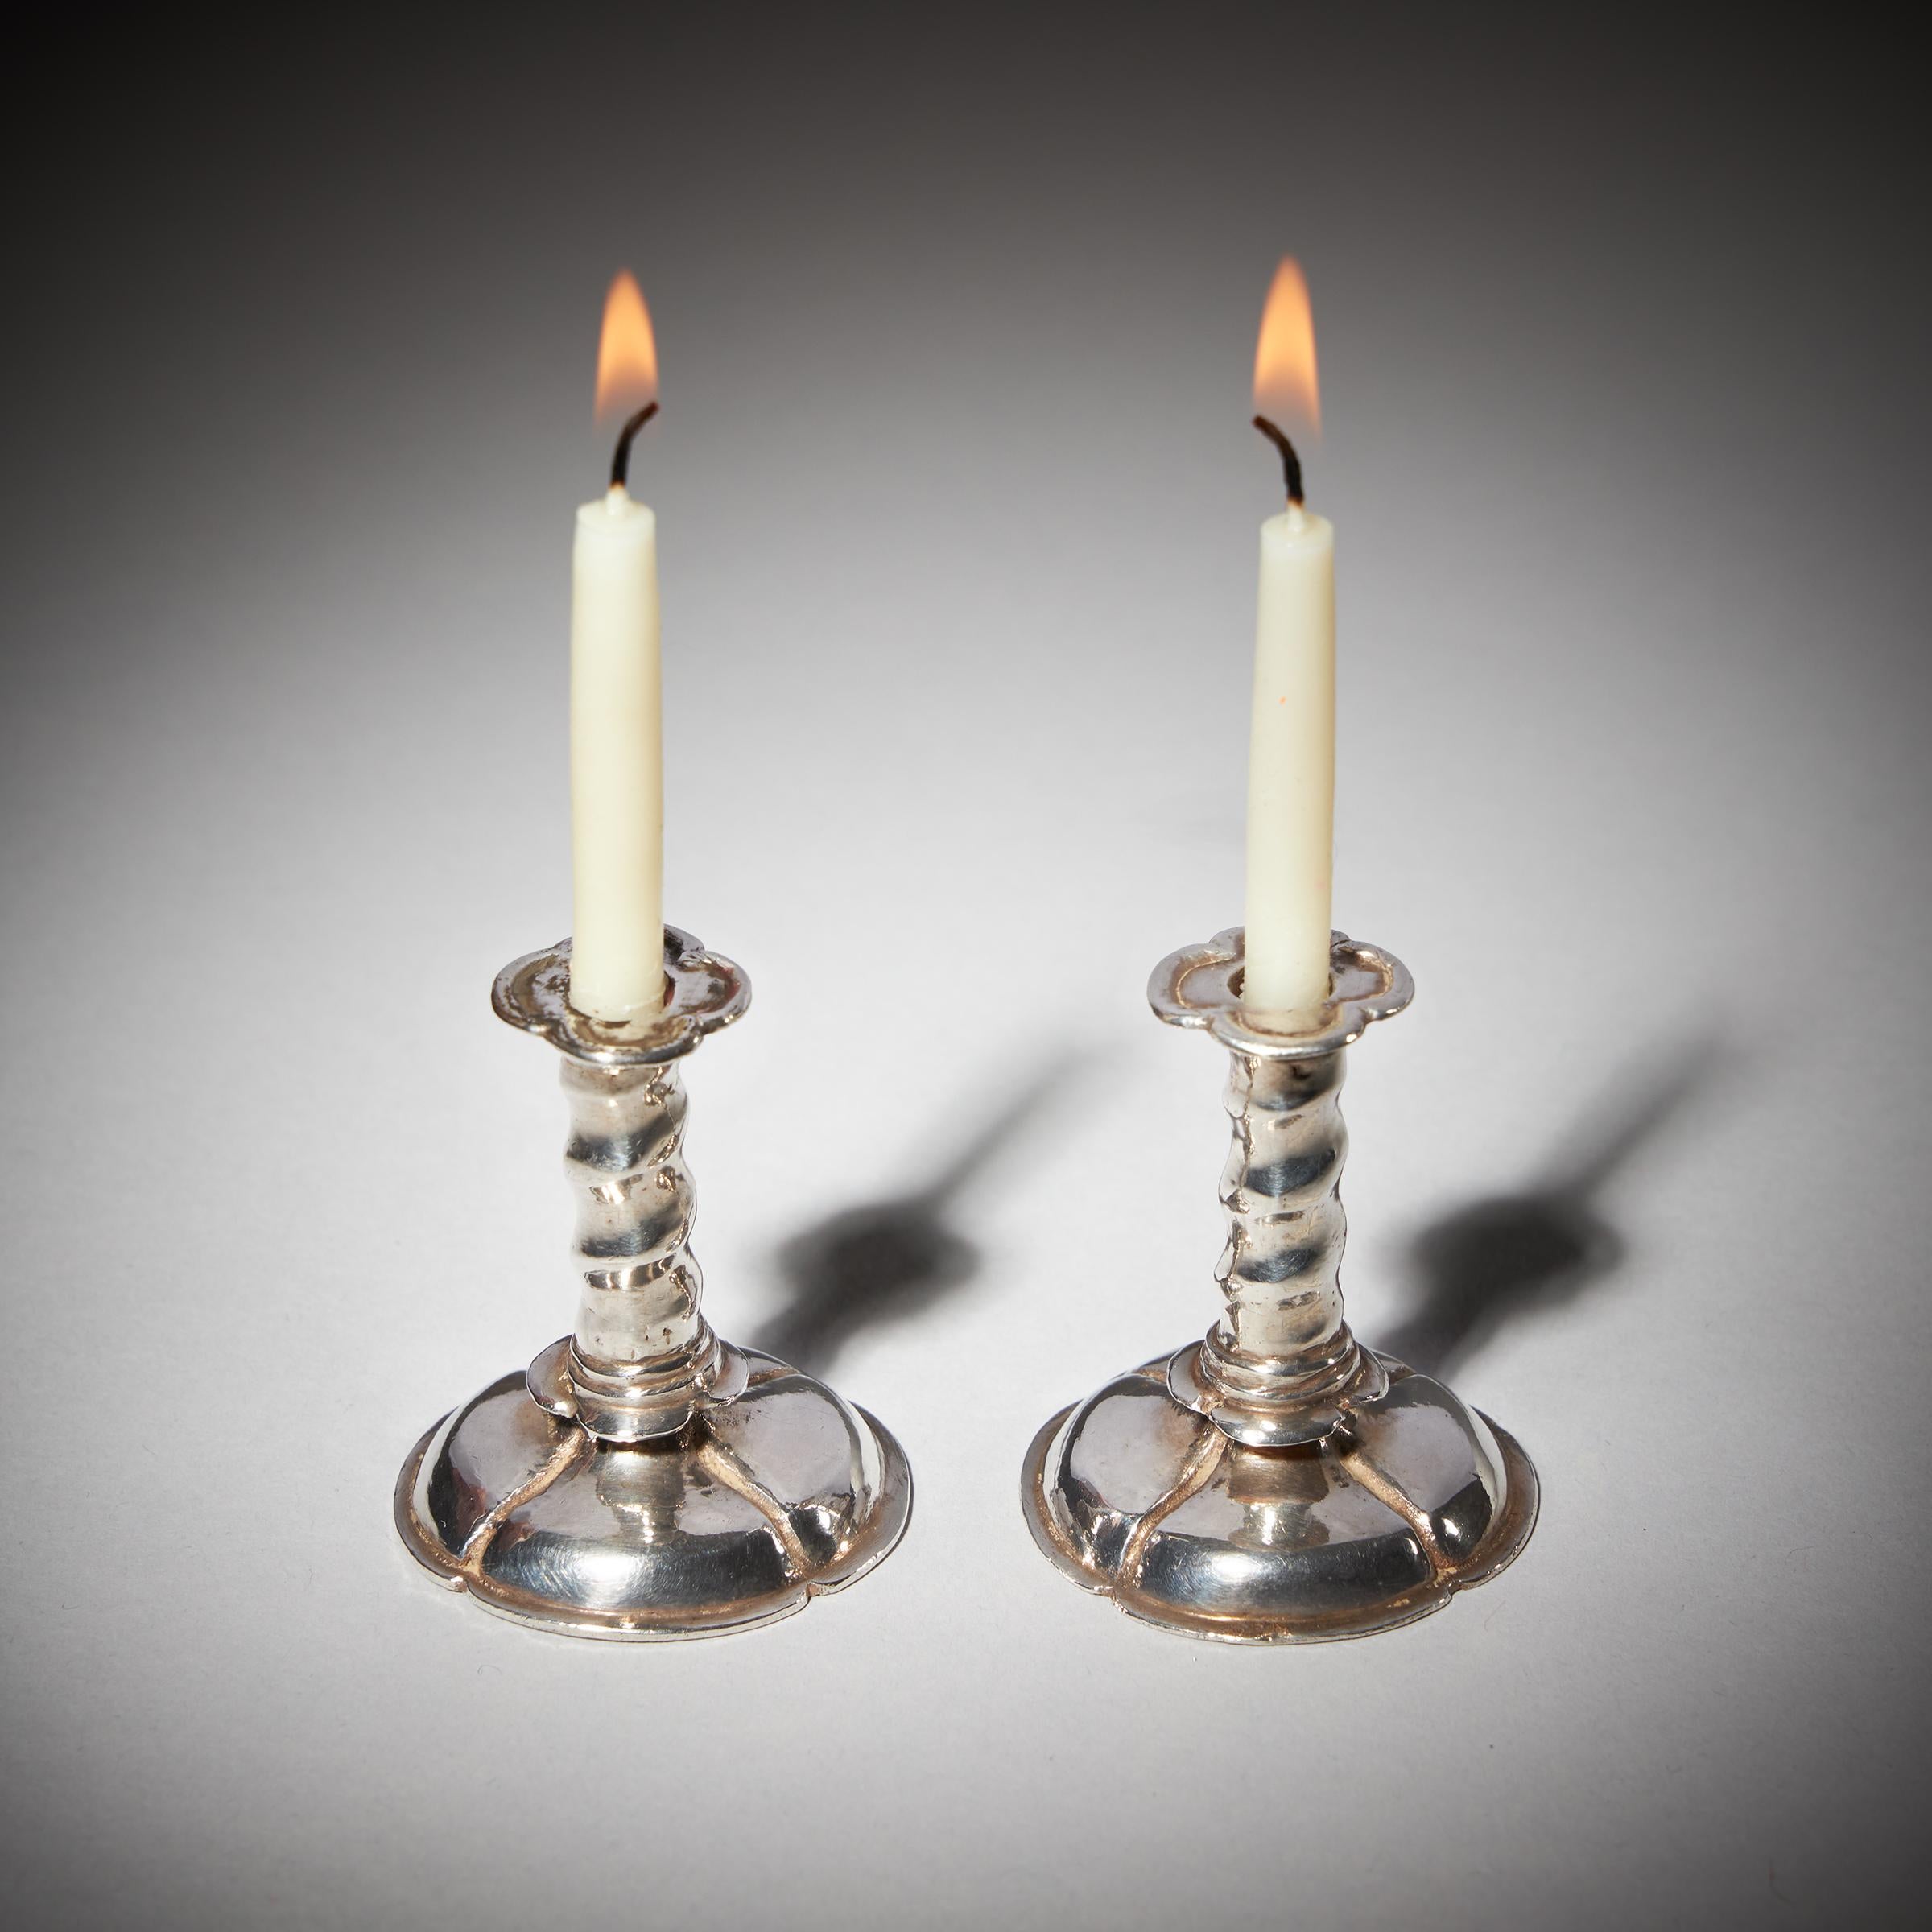 18th Century and Earlier Rare 17th Century Charles II Miniature Silver Trumpet Form Candlesticks , c 1660